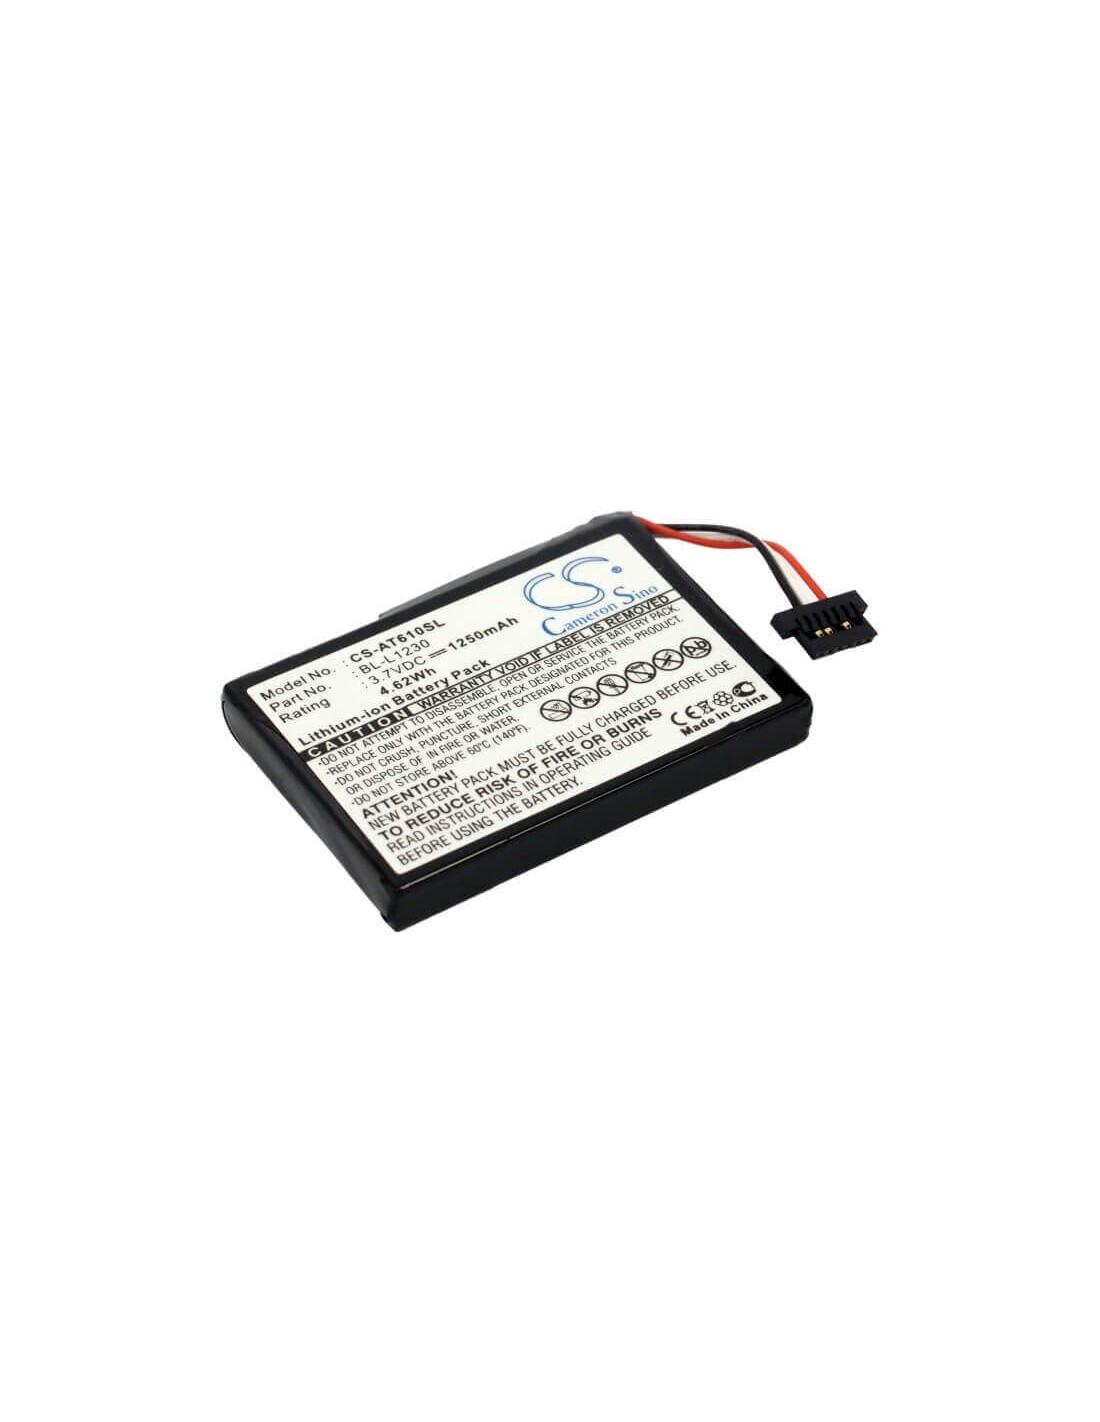 Battery for Airis T610, T620, T920 3.7V, 1250mAh - 4.63Wh